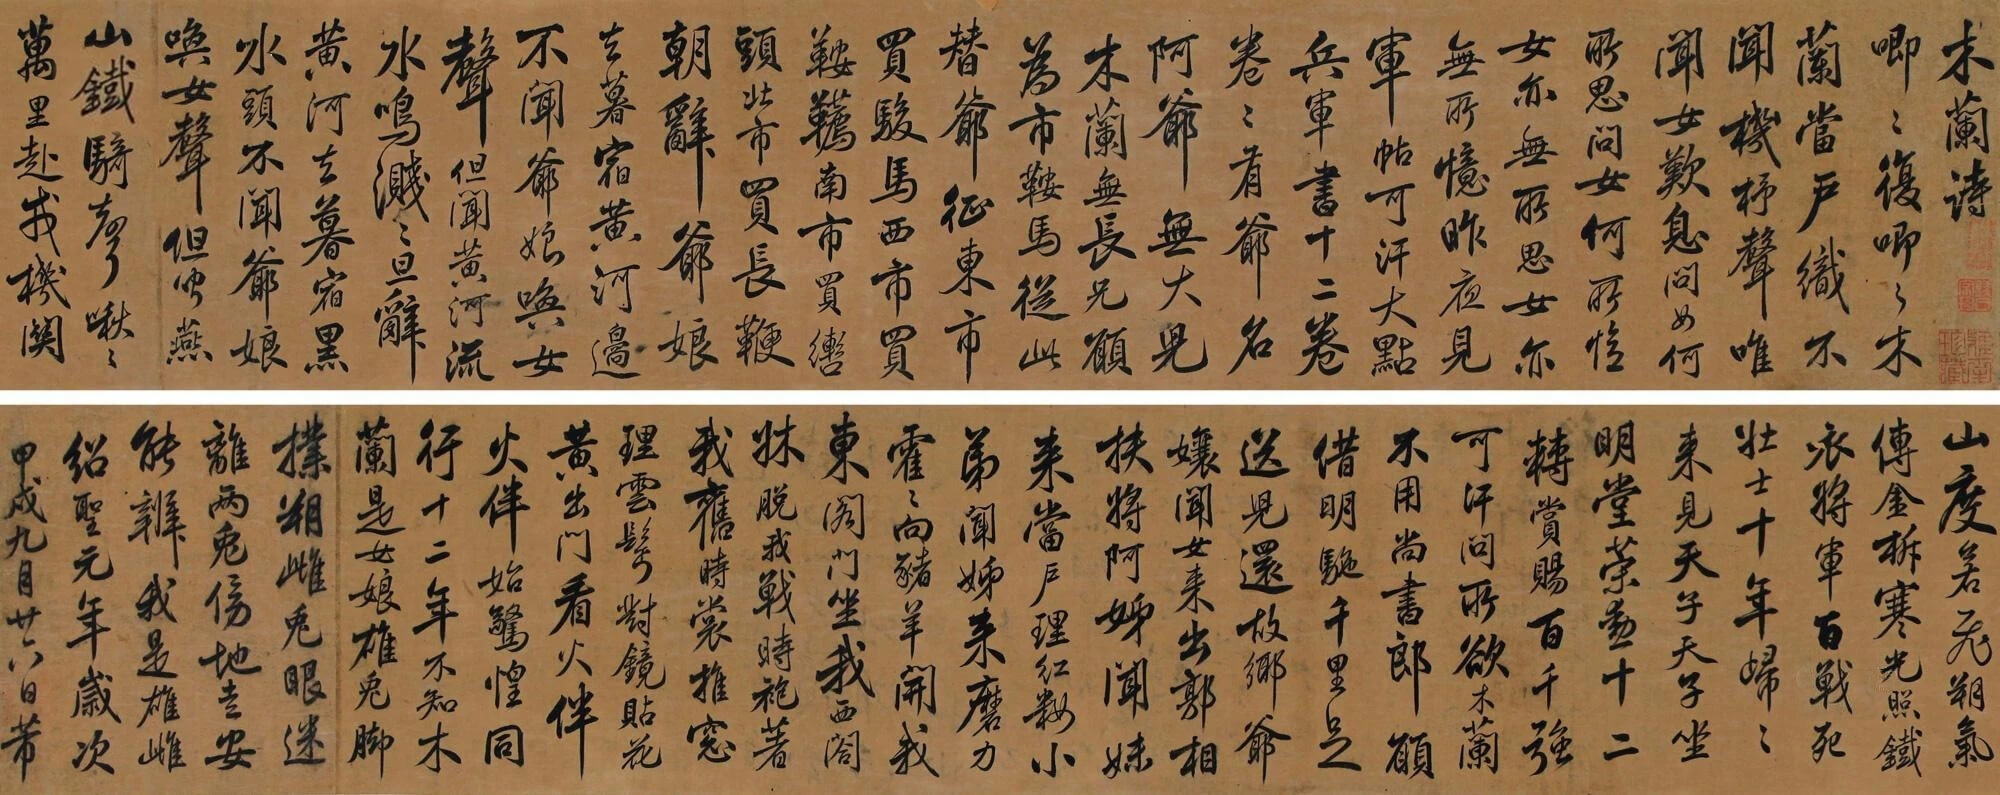 This copy of the Ballad was penned by Song dynasty calligrapher Mi Fu in 1094 AD (Public domain).